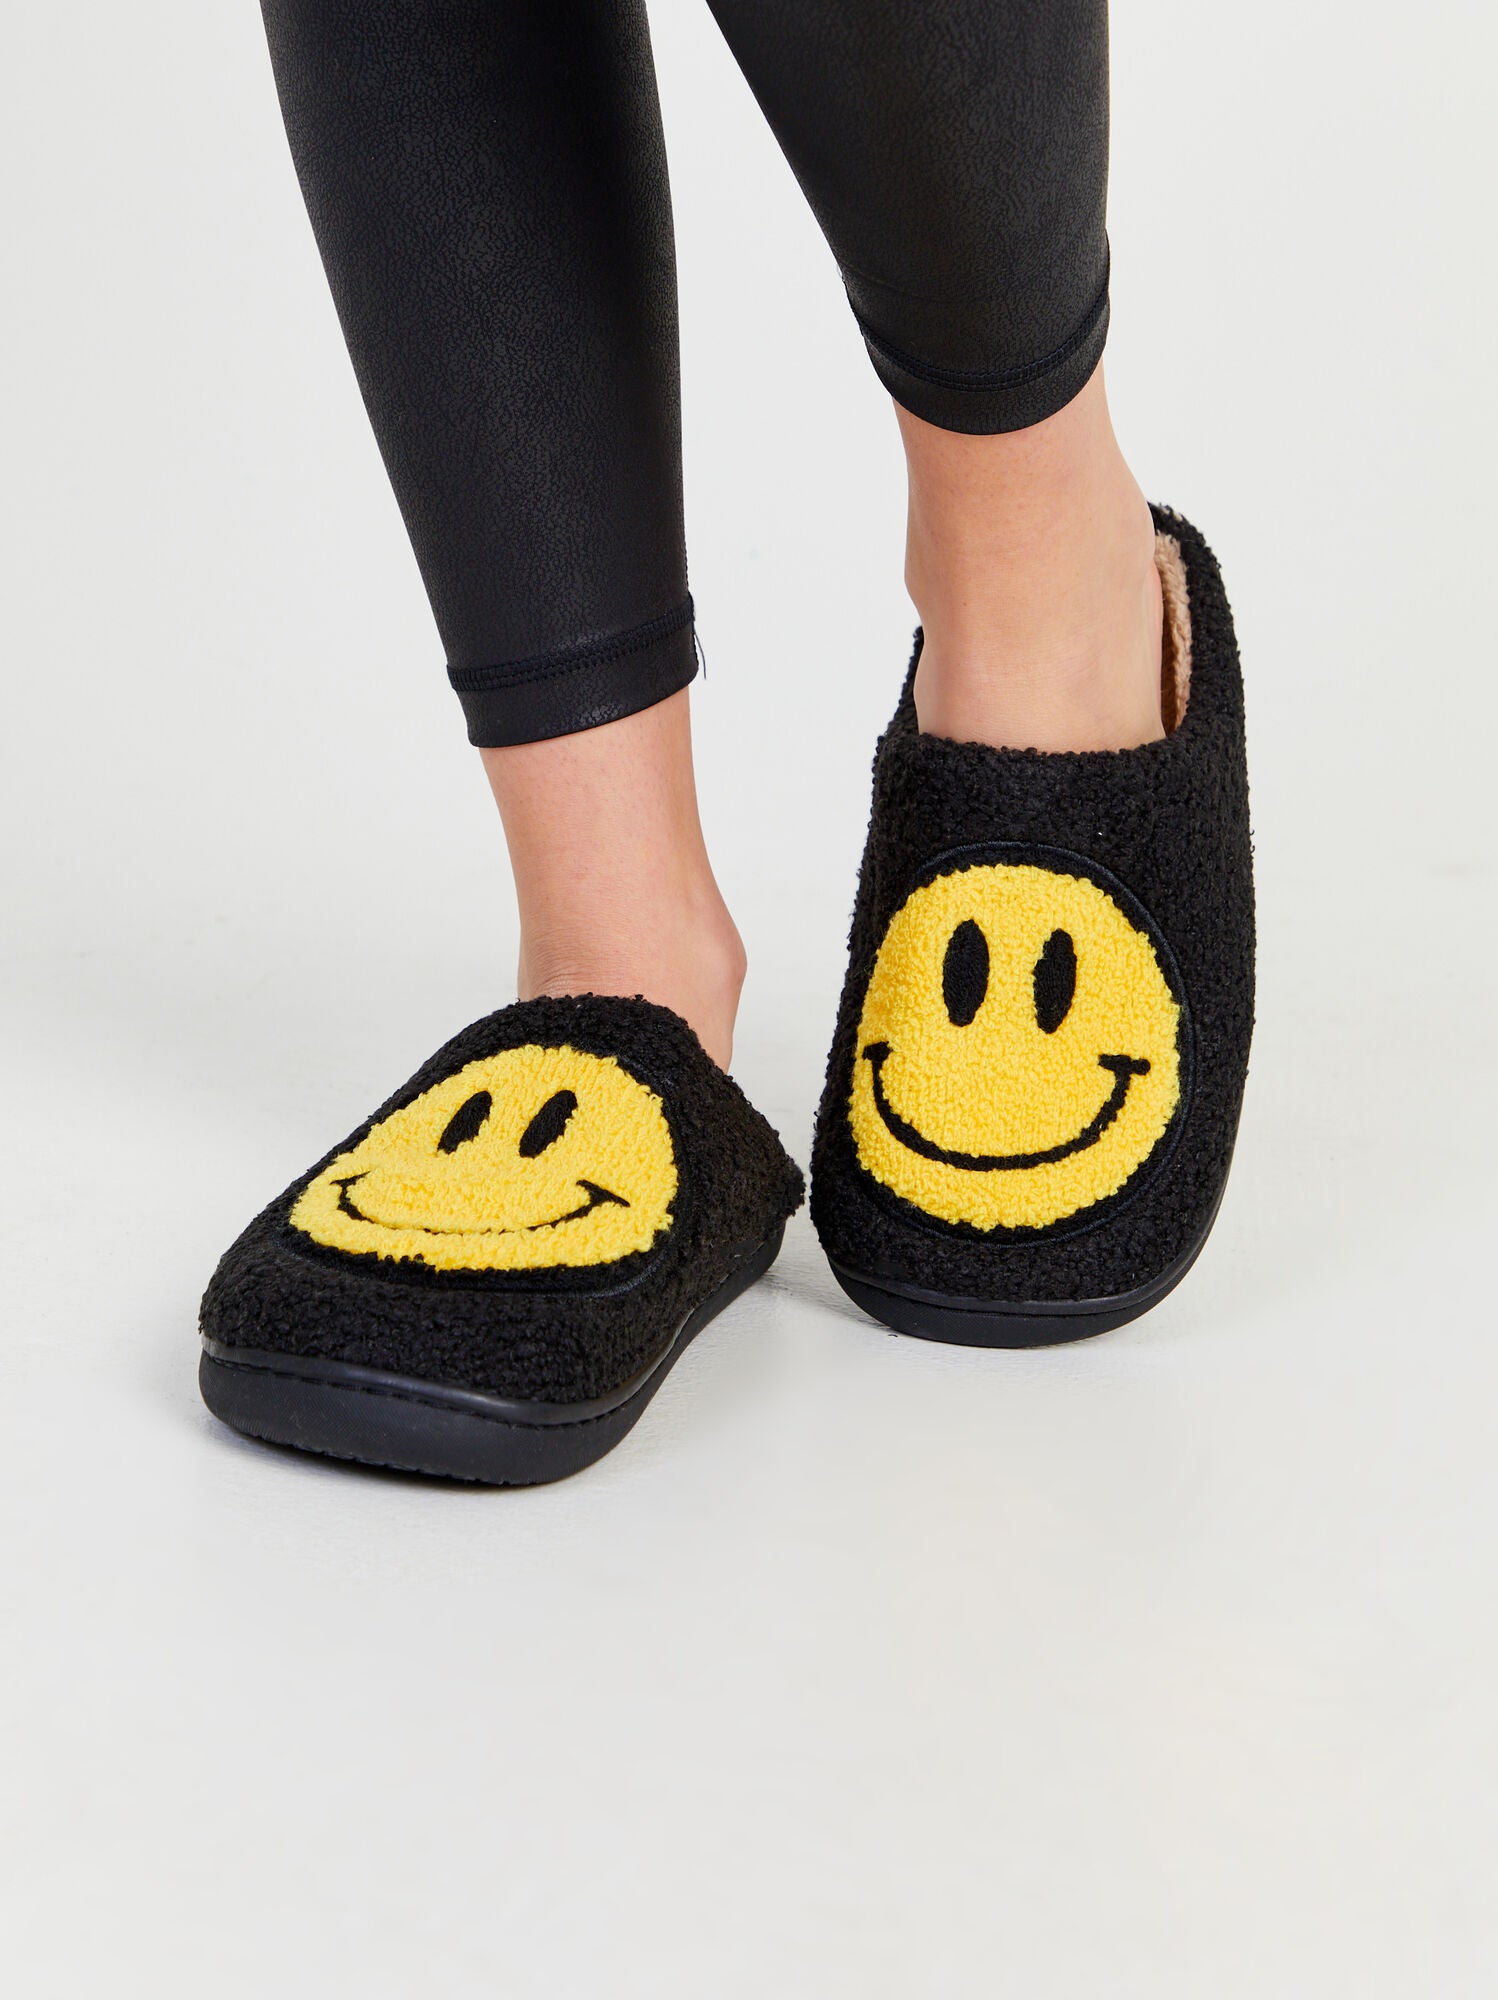 The Smiley Face Slippers A Fashion Statement